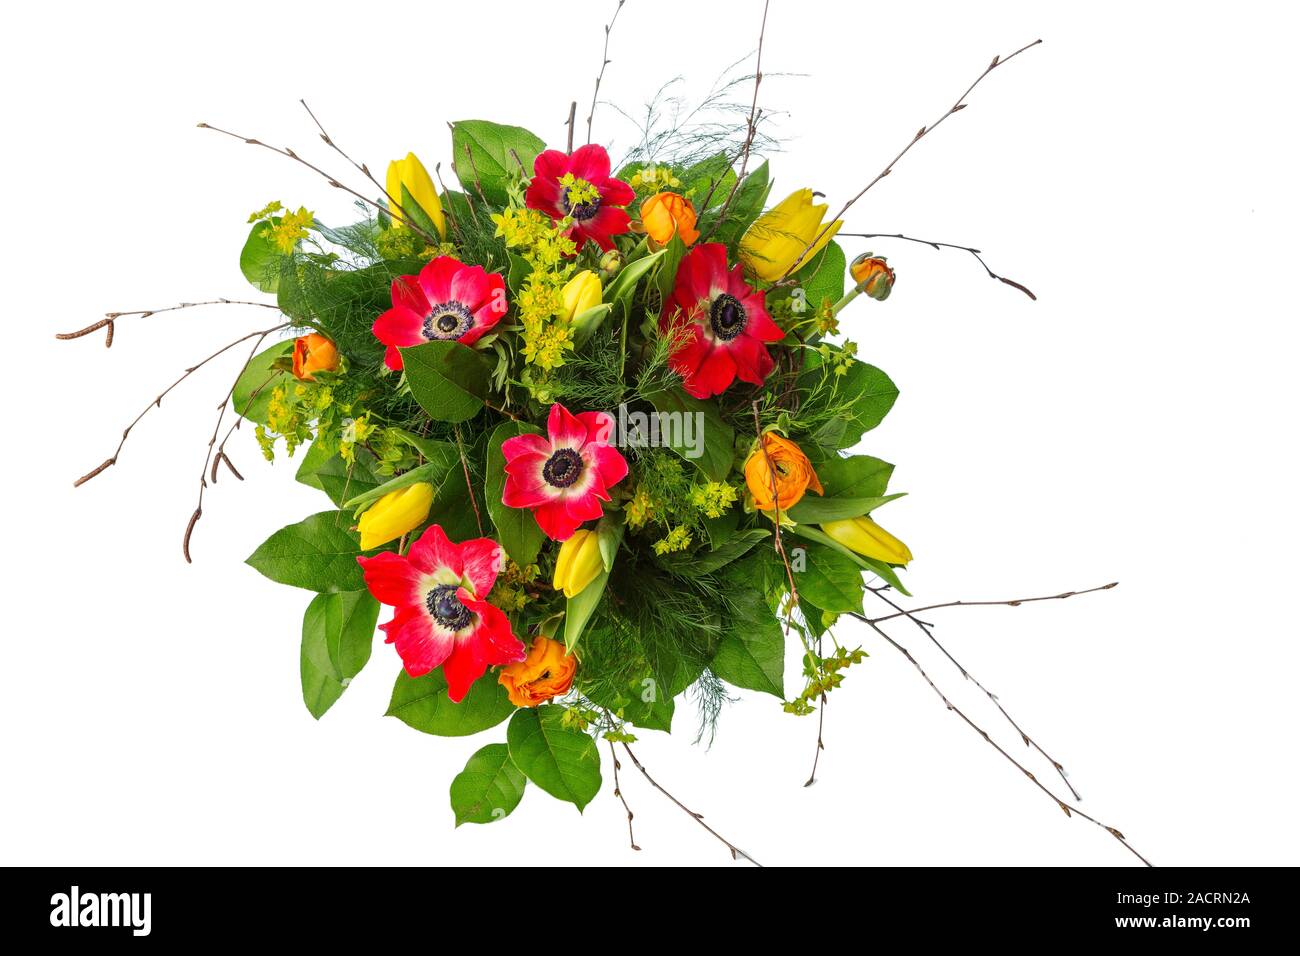 Bouquet with spring flowers Stock Photo